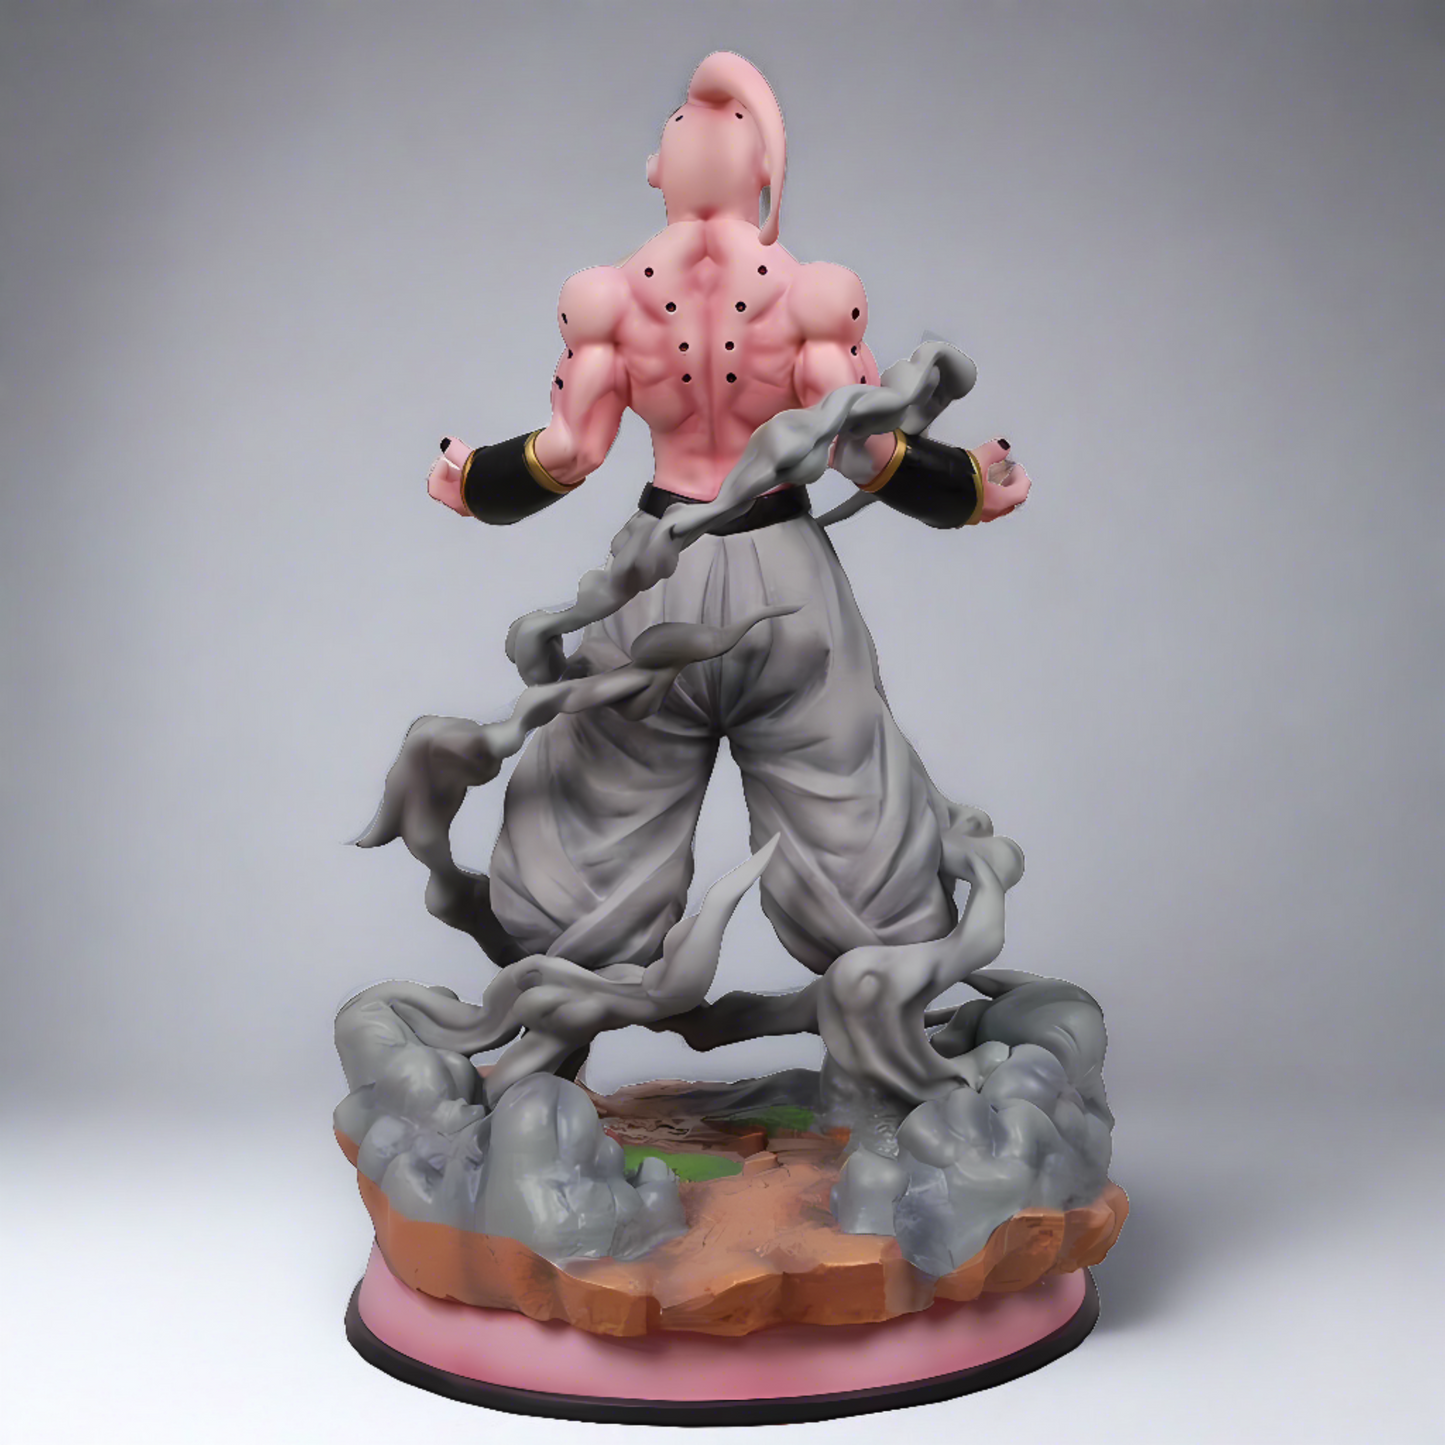 Rear view of Dragon Ball's Majin Buu collectible figure stands with a serene expression and arms outstretched, wearing grey pants and black wristbands, on a rocky base.